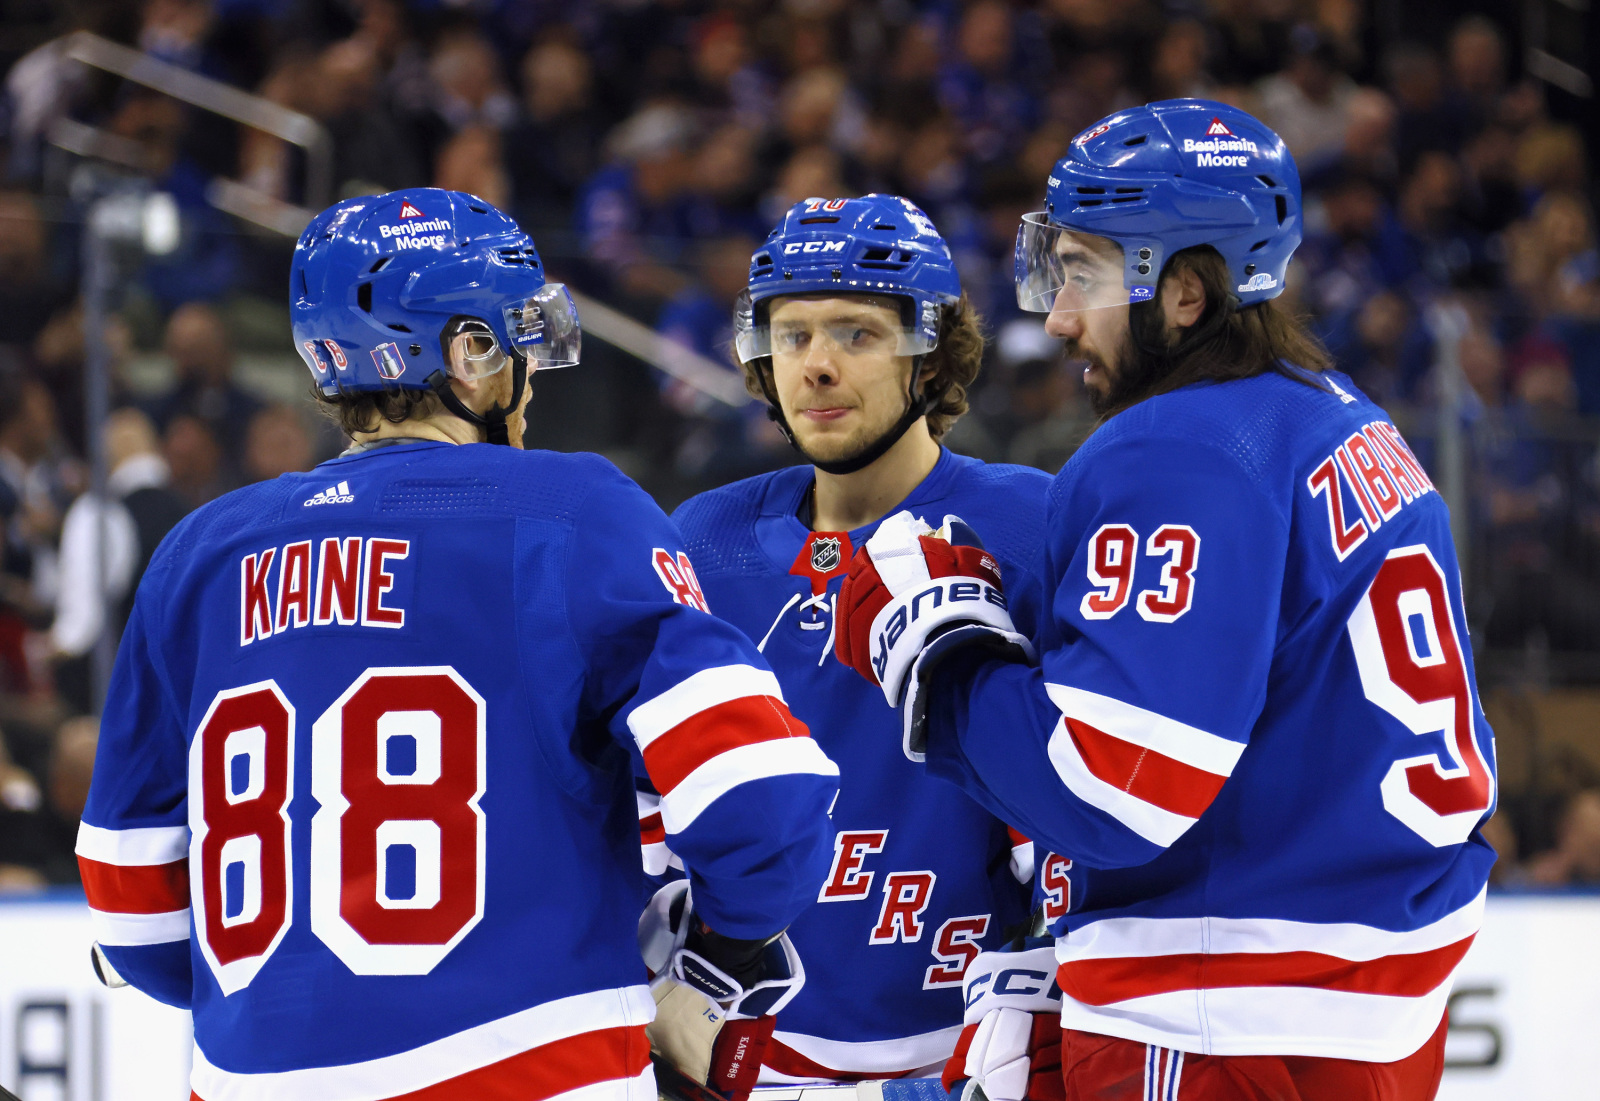 NHL: The New York Rangers win Game Four of the Stanley Cup final